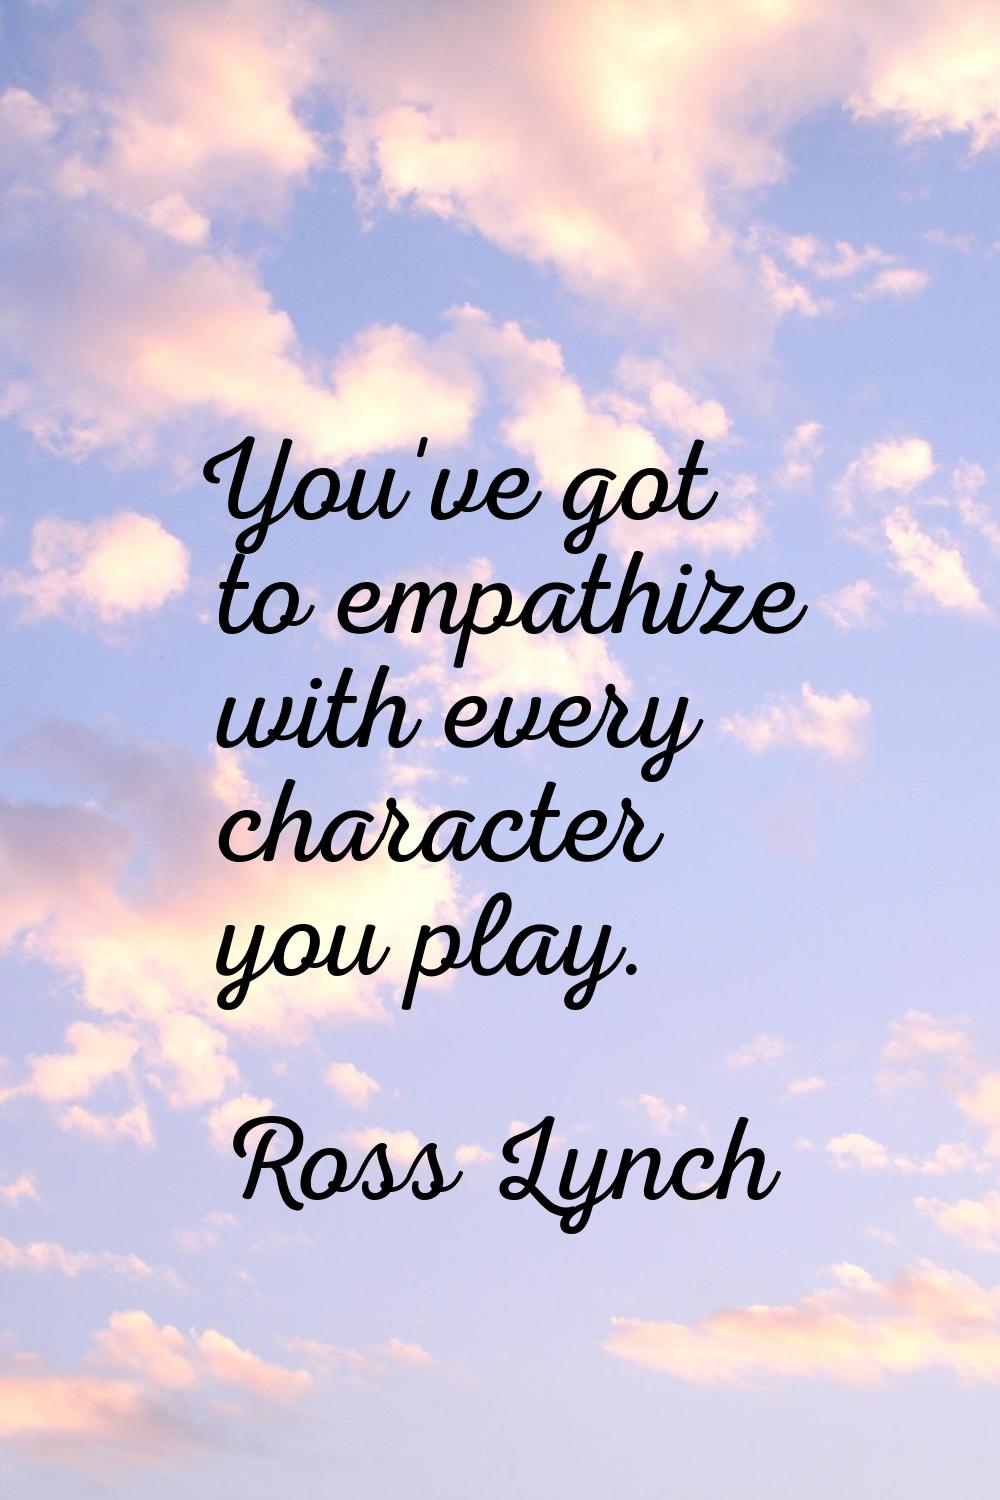 You've got to empathize with every character you play.